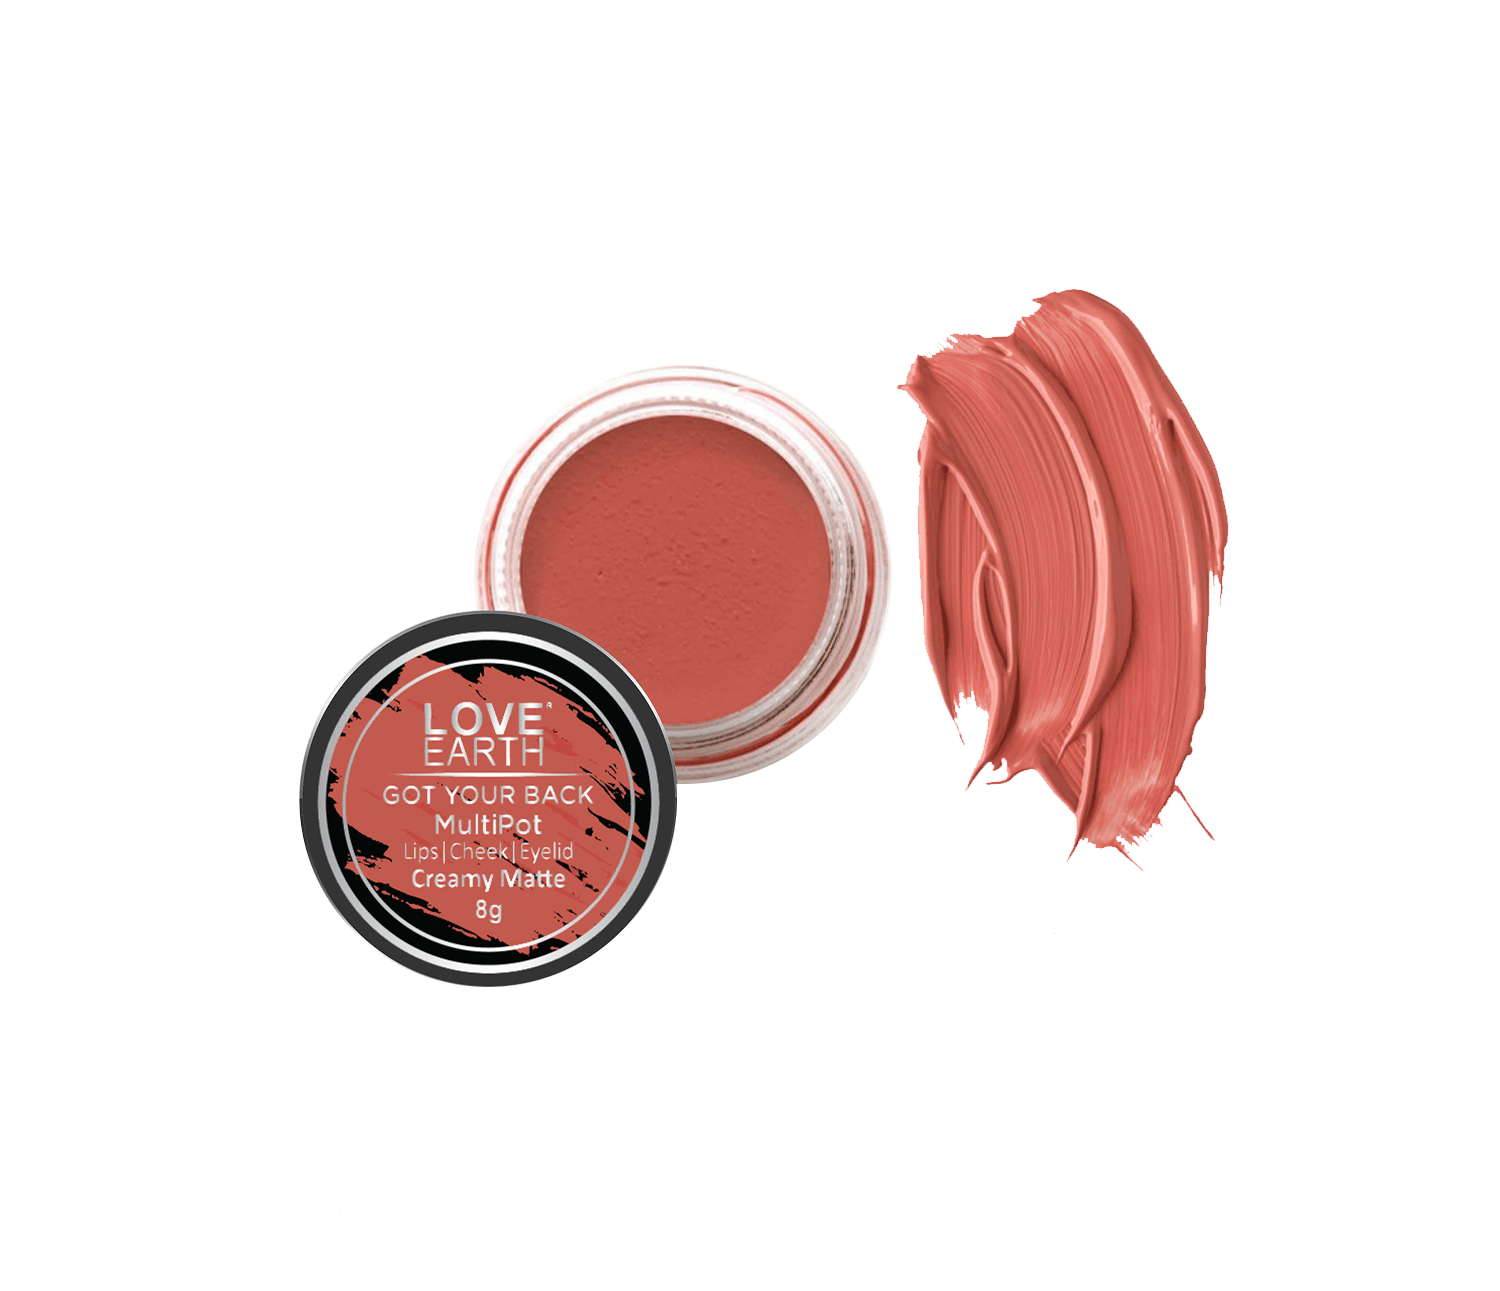 LOVE EARTH | Love Earth Lip Tint & Cheek Tint Multipot-Got Your Back With Richness Of Essential Oils And Vitamin E For Lips, Eyelids & Cheeks, Matte Finish - Coral